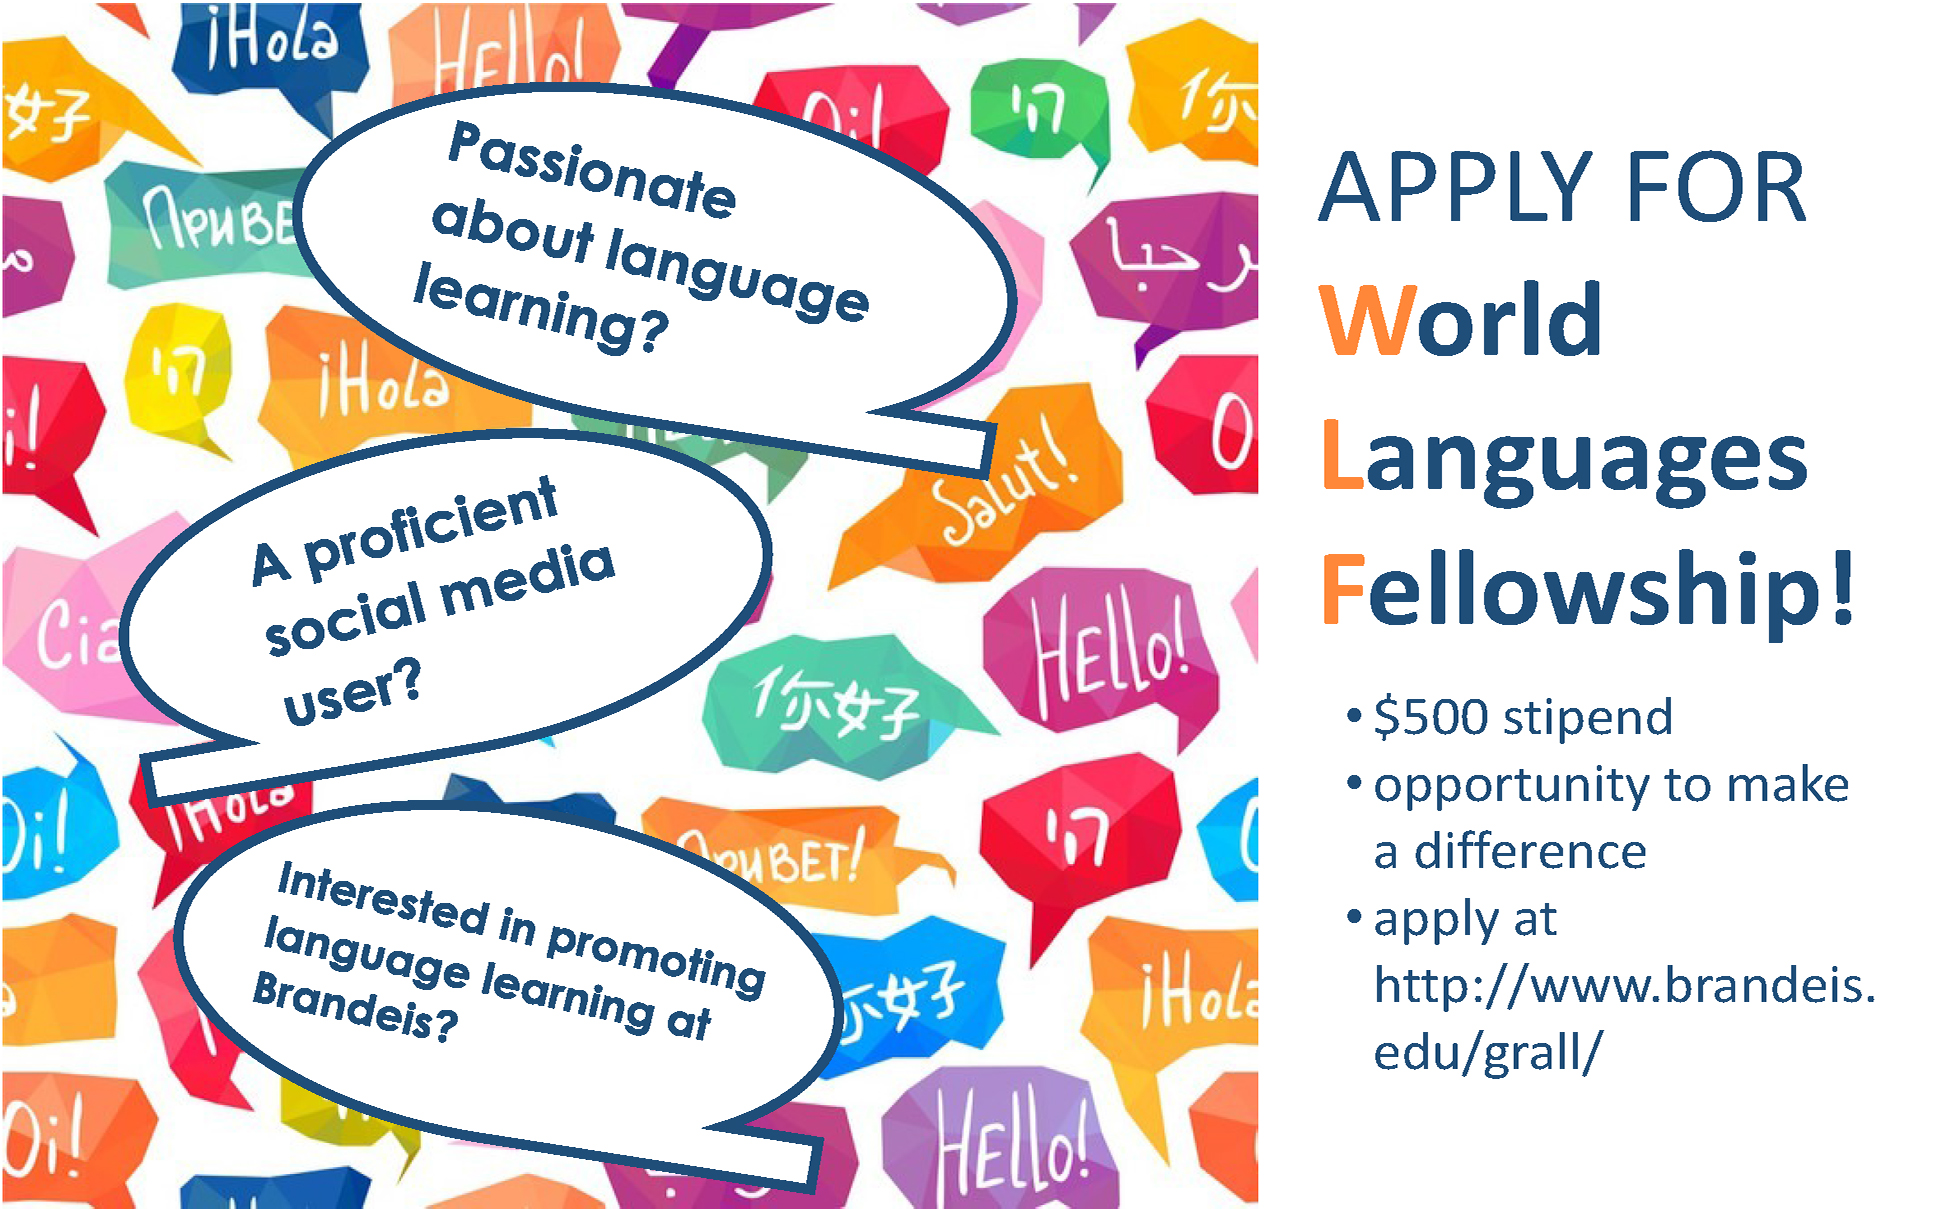 image of poster advertising World Languages Fellowship. text reads: passionate about language learning? a proficient social media user? interested in promoting language learning at Brandeis? Apply for World Languages Fellowship! $500 stiped, opportunity to make a difference, apply at http://www.brandeis.edu/grall